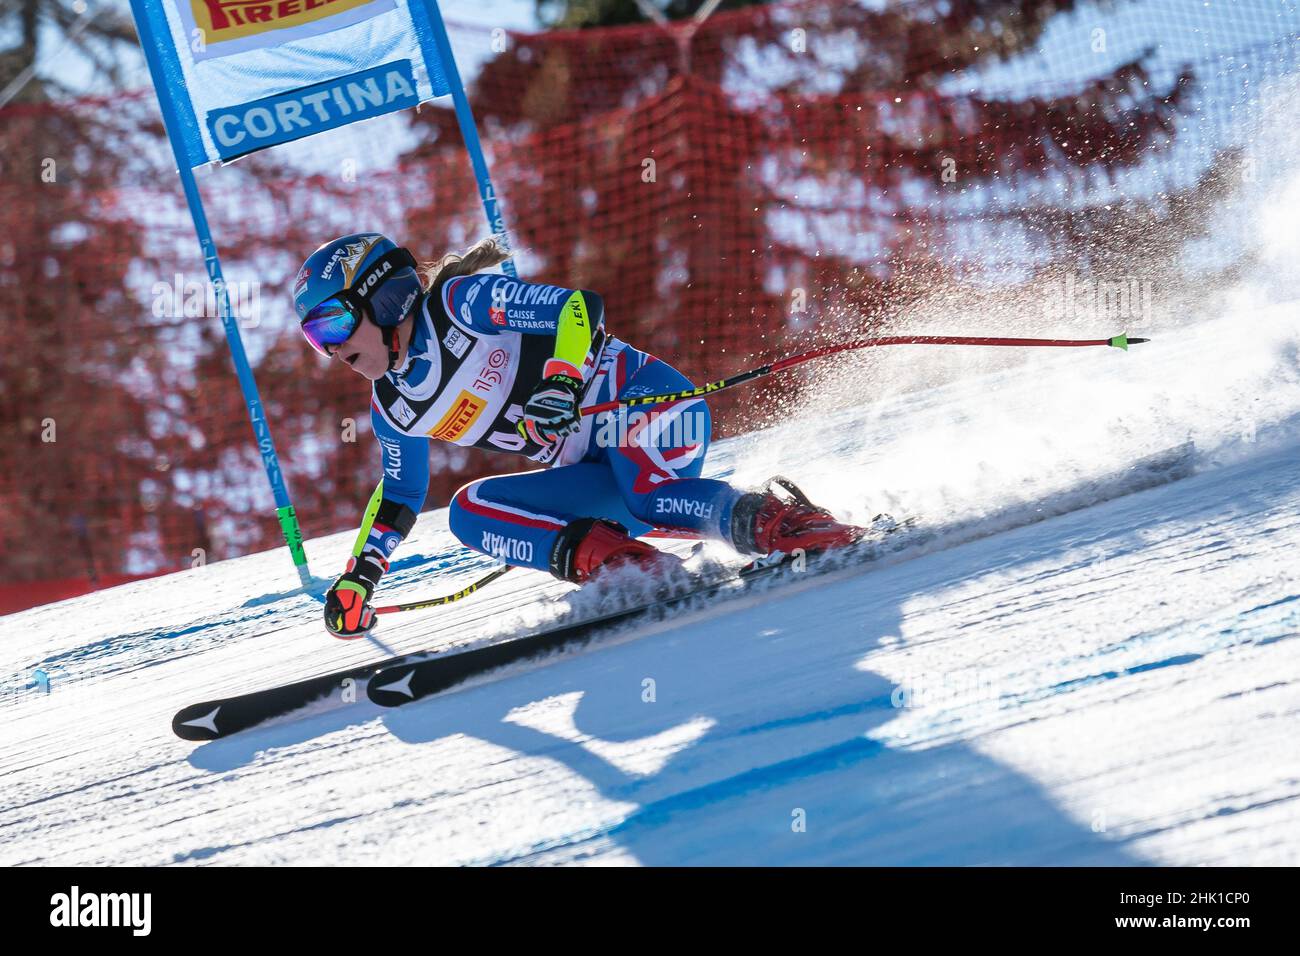 Cortina d'Ampezzo, Italy. 23 January 2022. CERUTTI Camille (FRA) competing in the Fis Alpine Ski World Cup Women's Super-G on the Olympia delle Tofane Stock Photo